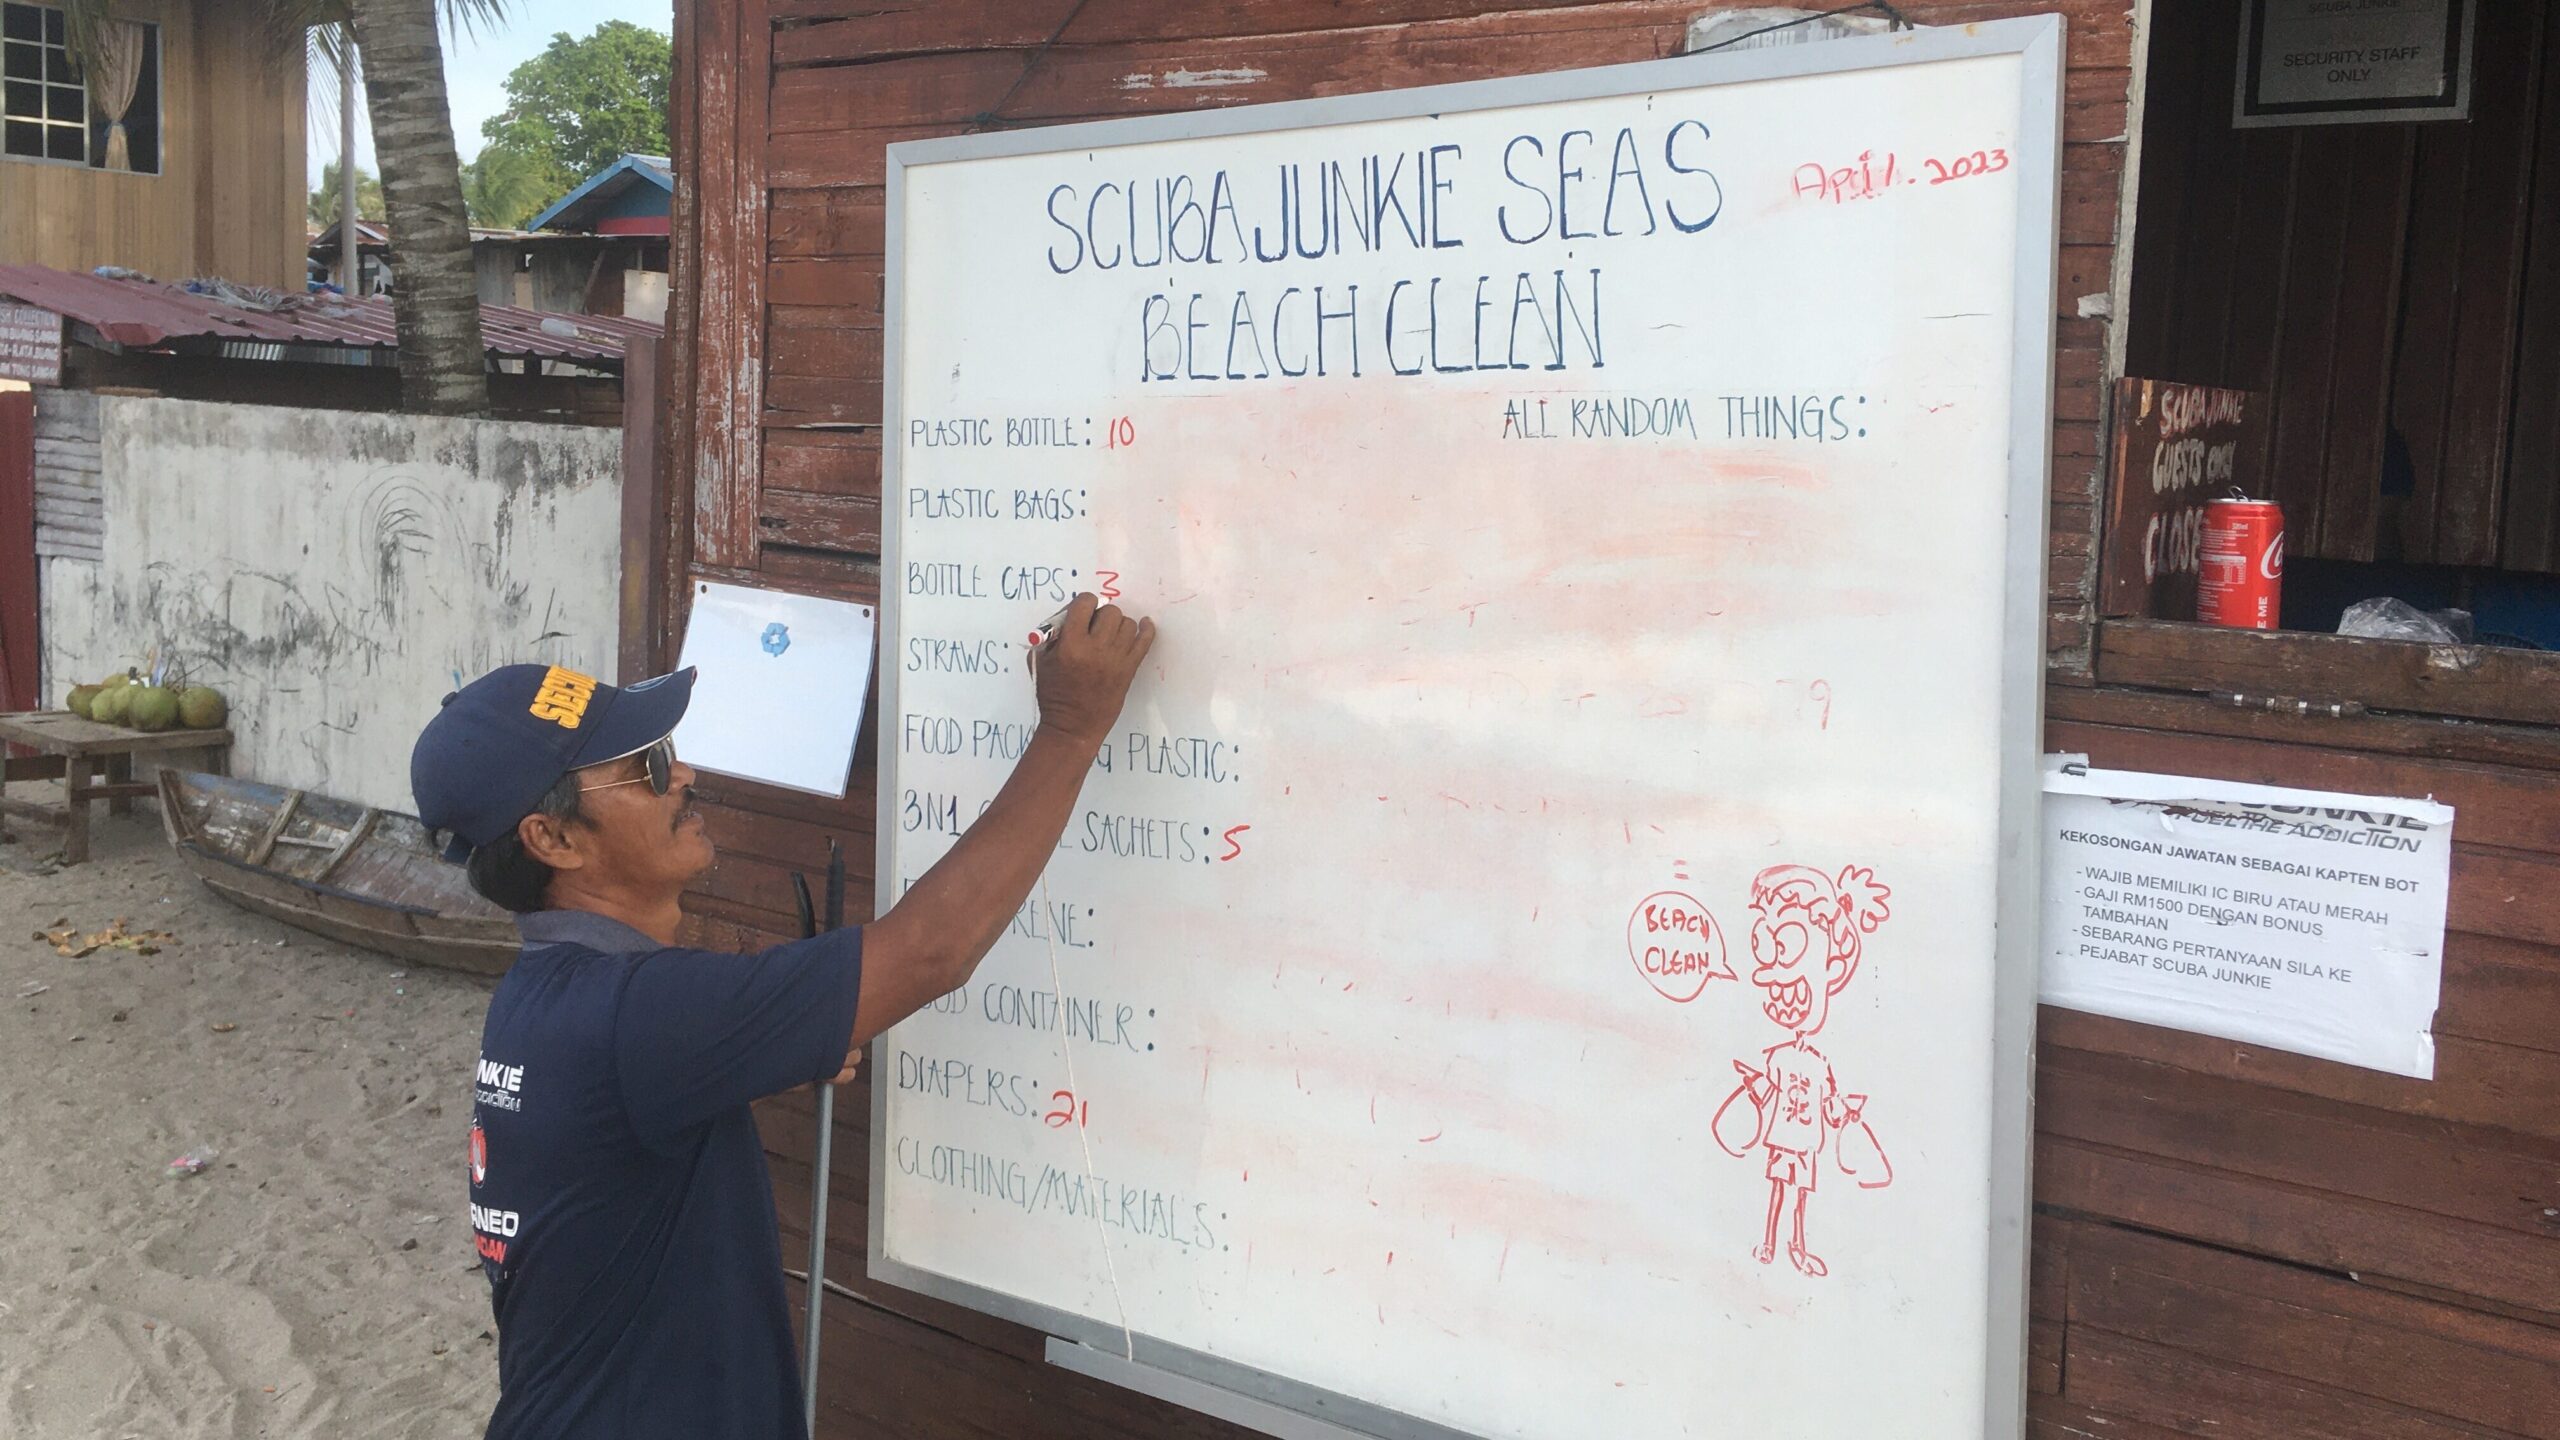 Security guard Ghanni helping caunting and categorizing the debris on the beach cleanups